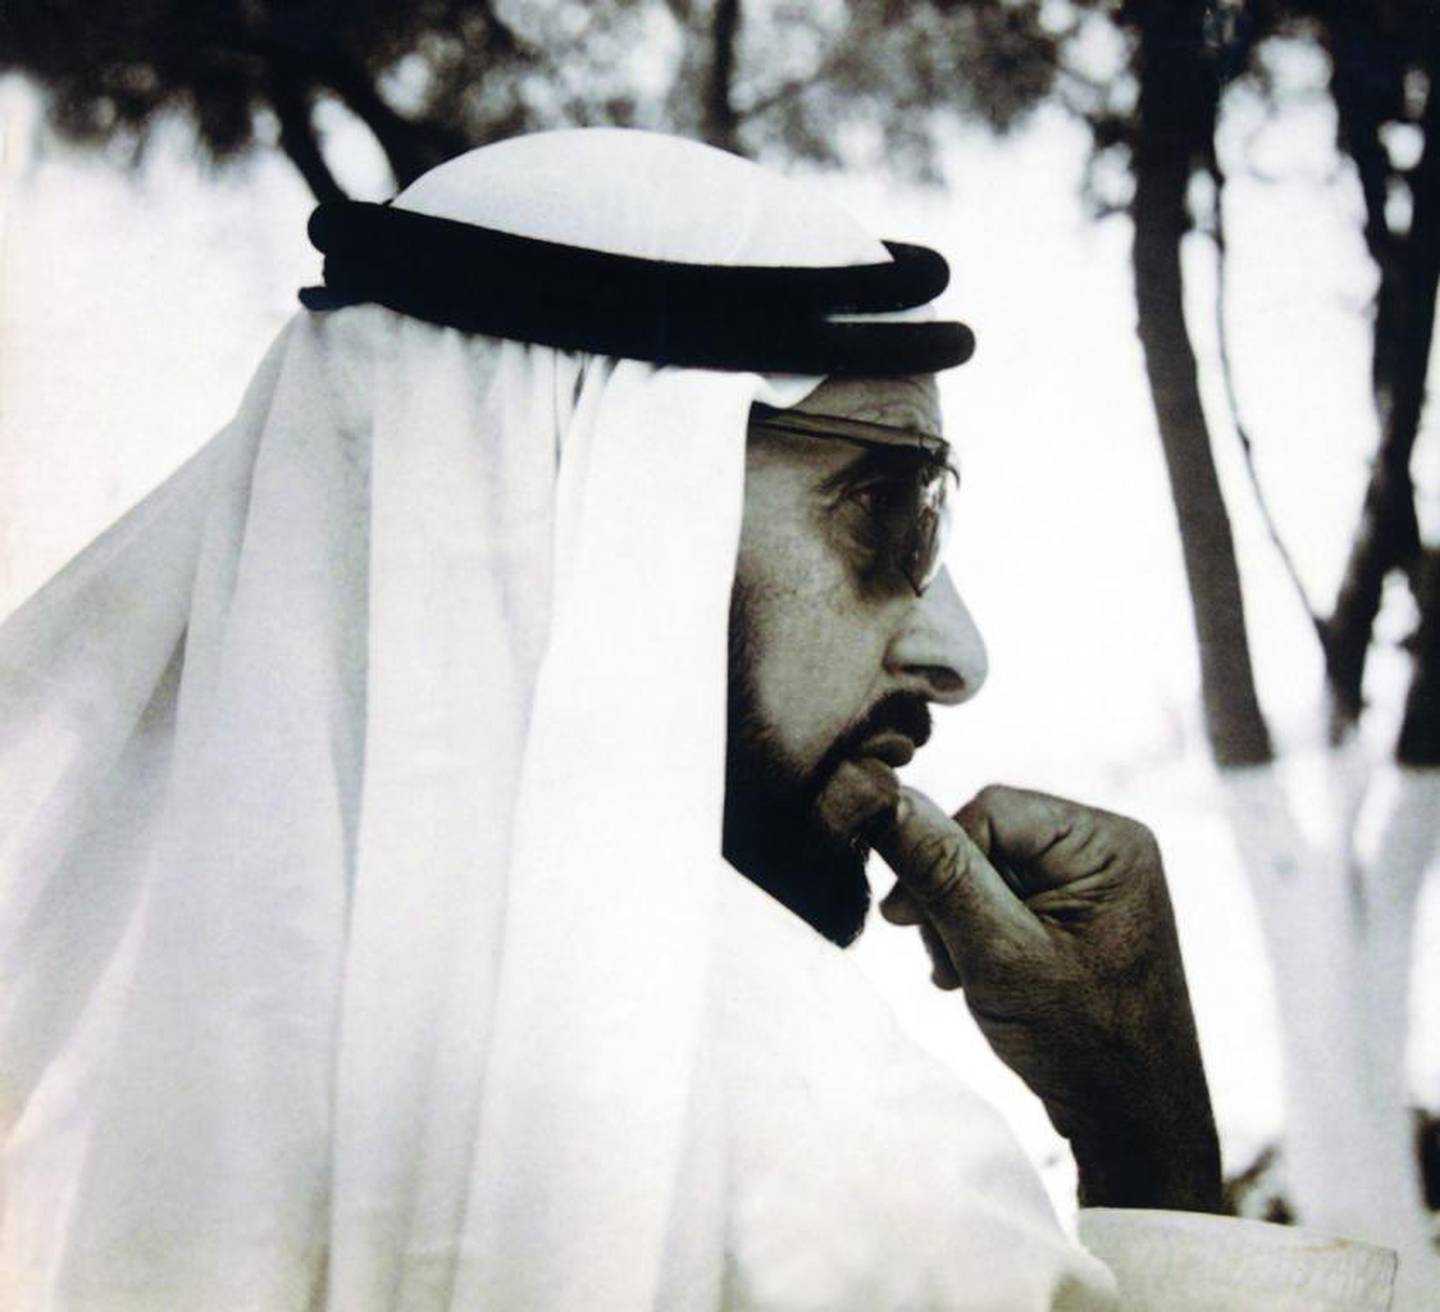 Sheikh Zayed, the Founding Father, left an impact on all who met him. National Archives